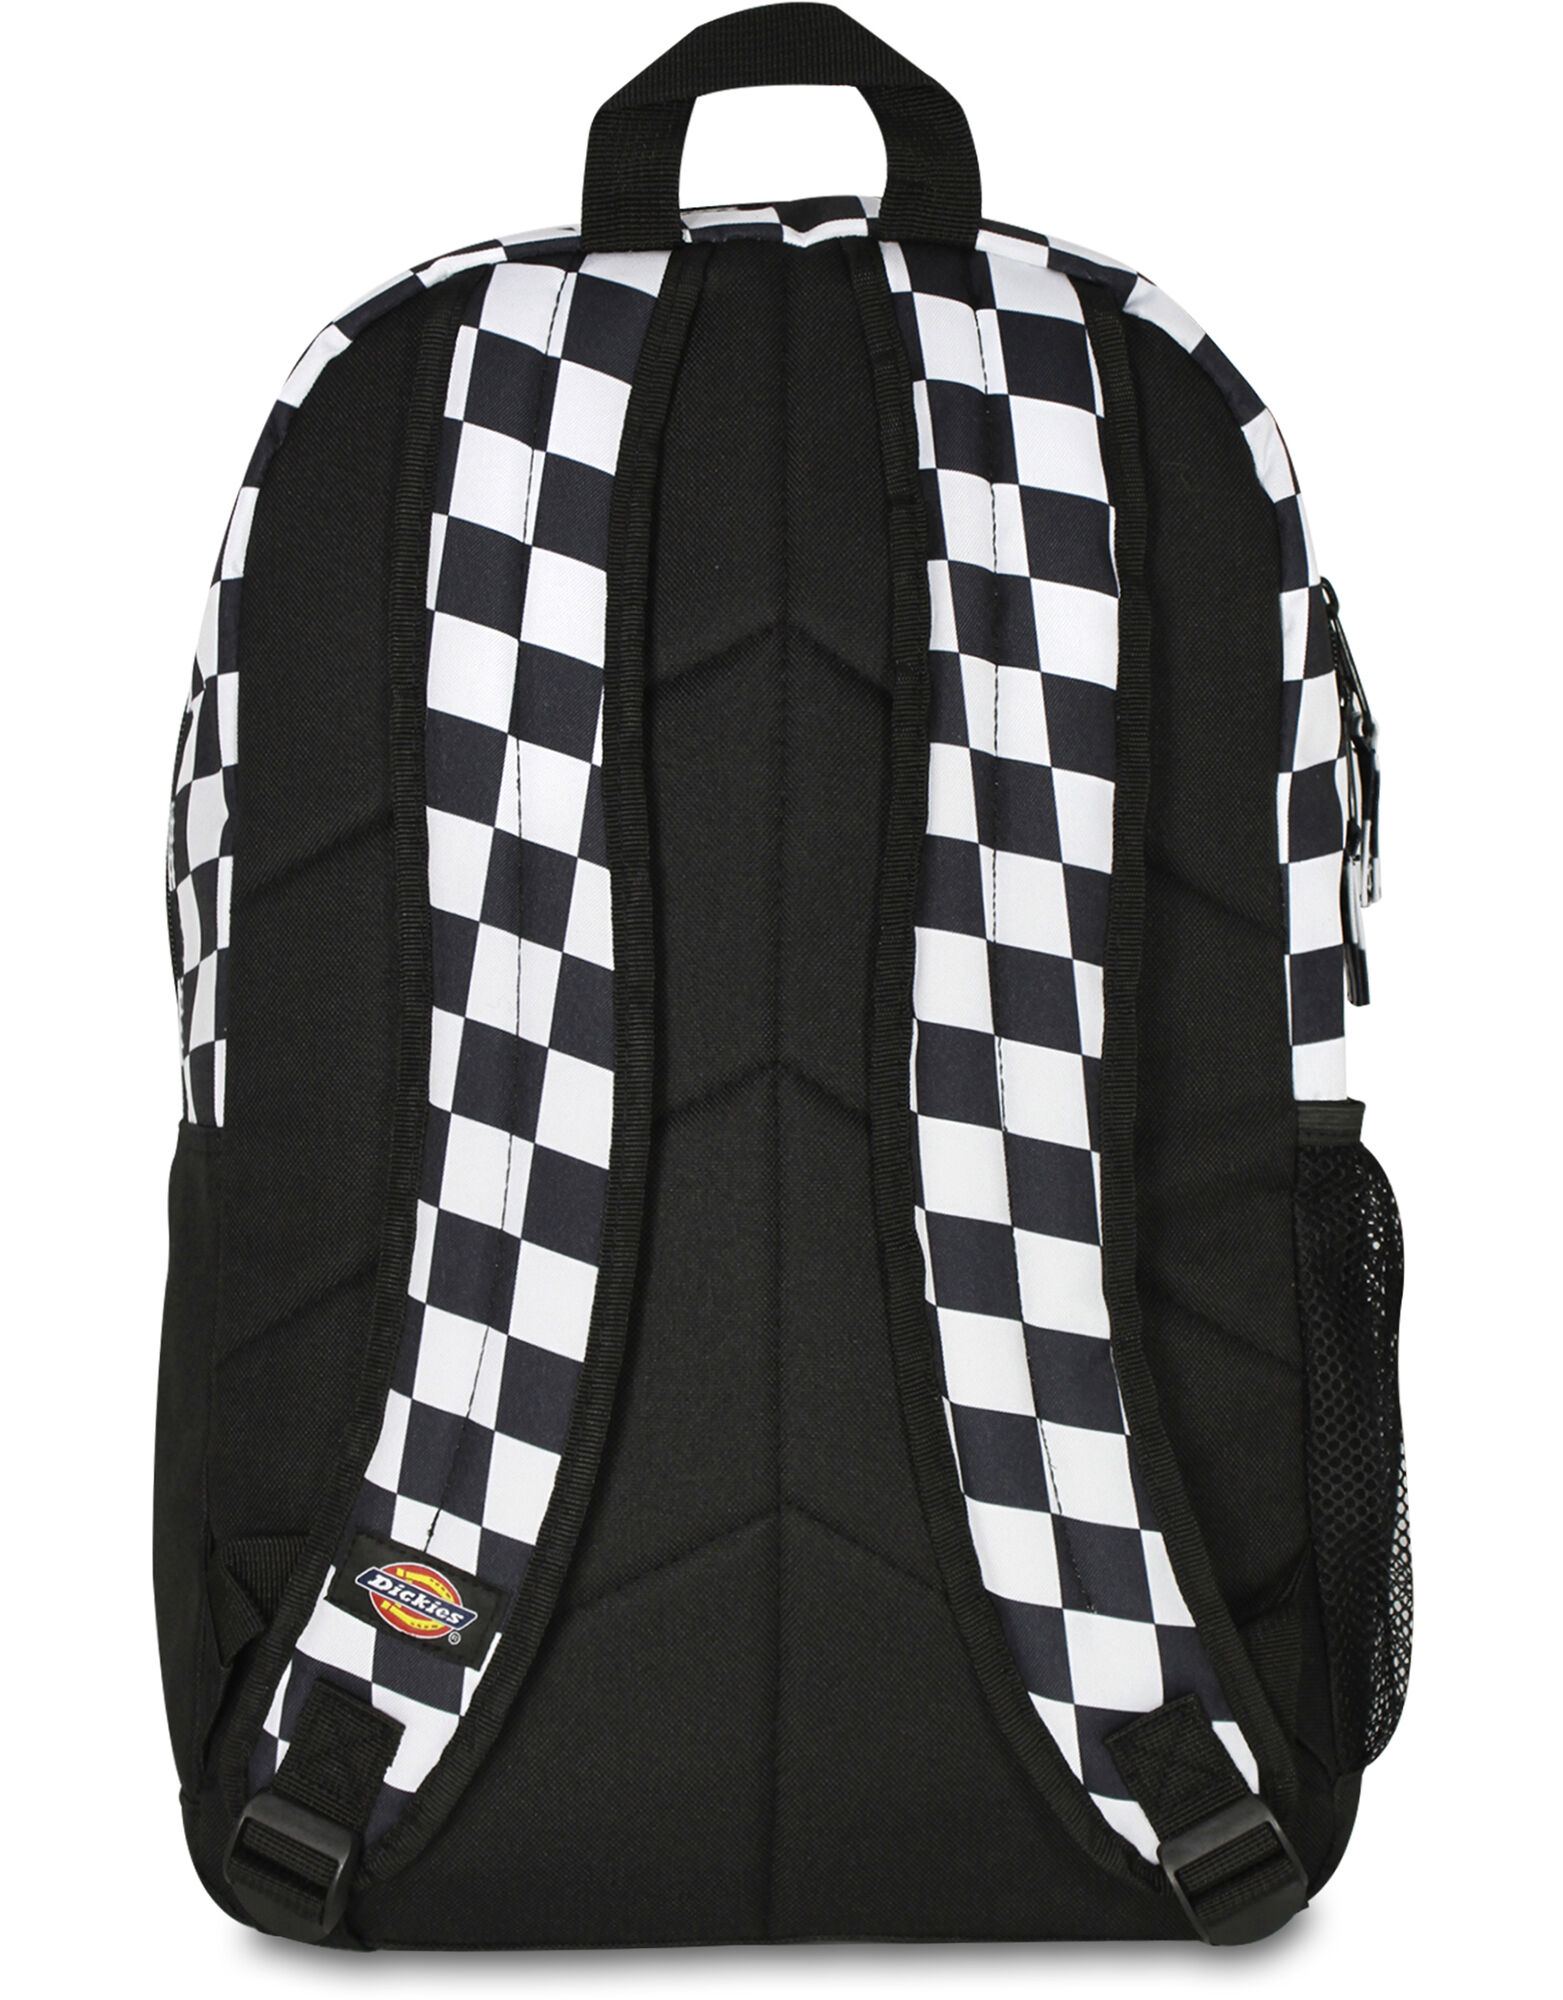 Dickies Checkered Student Backpack 